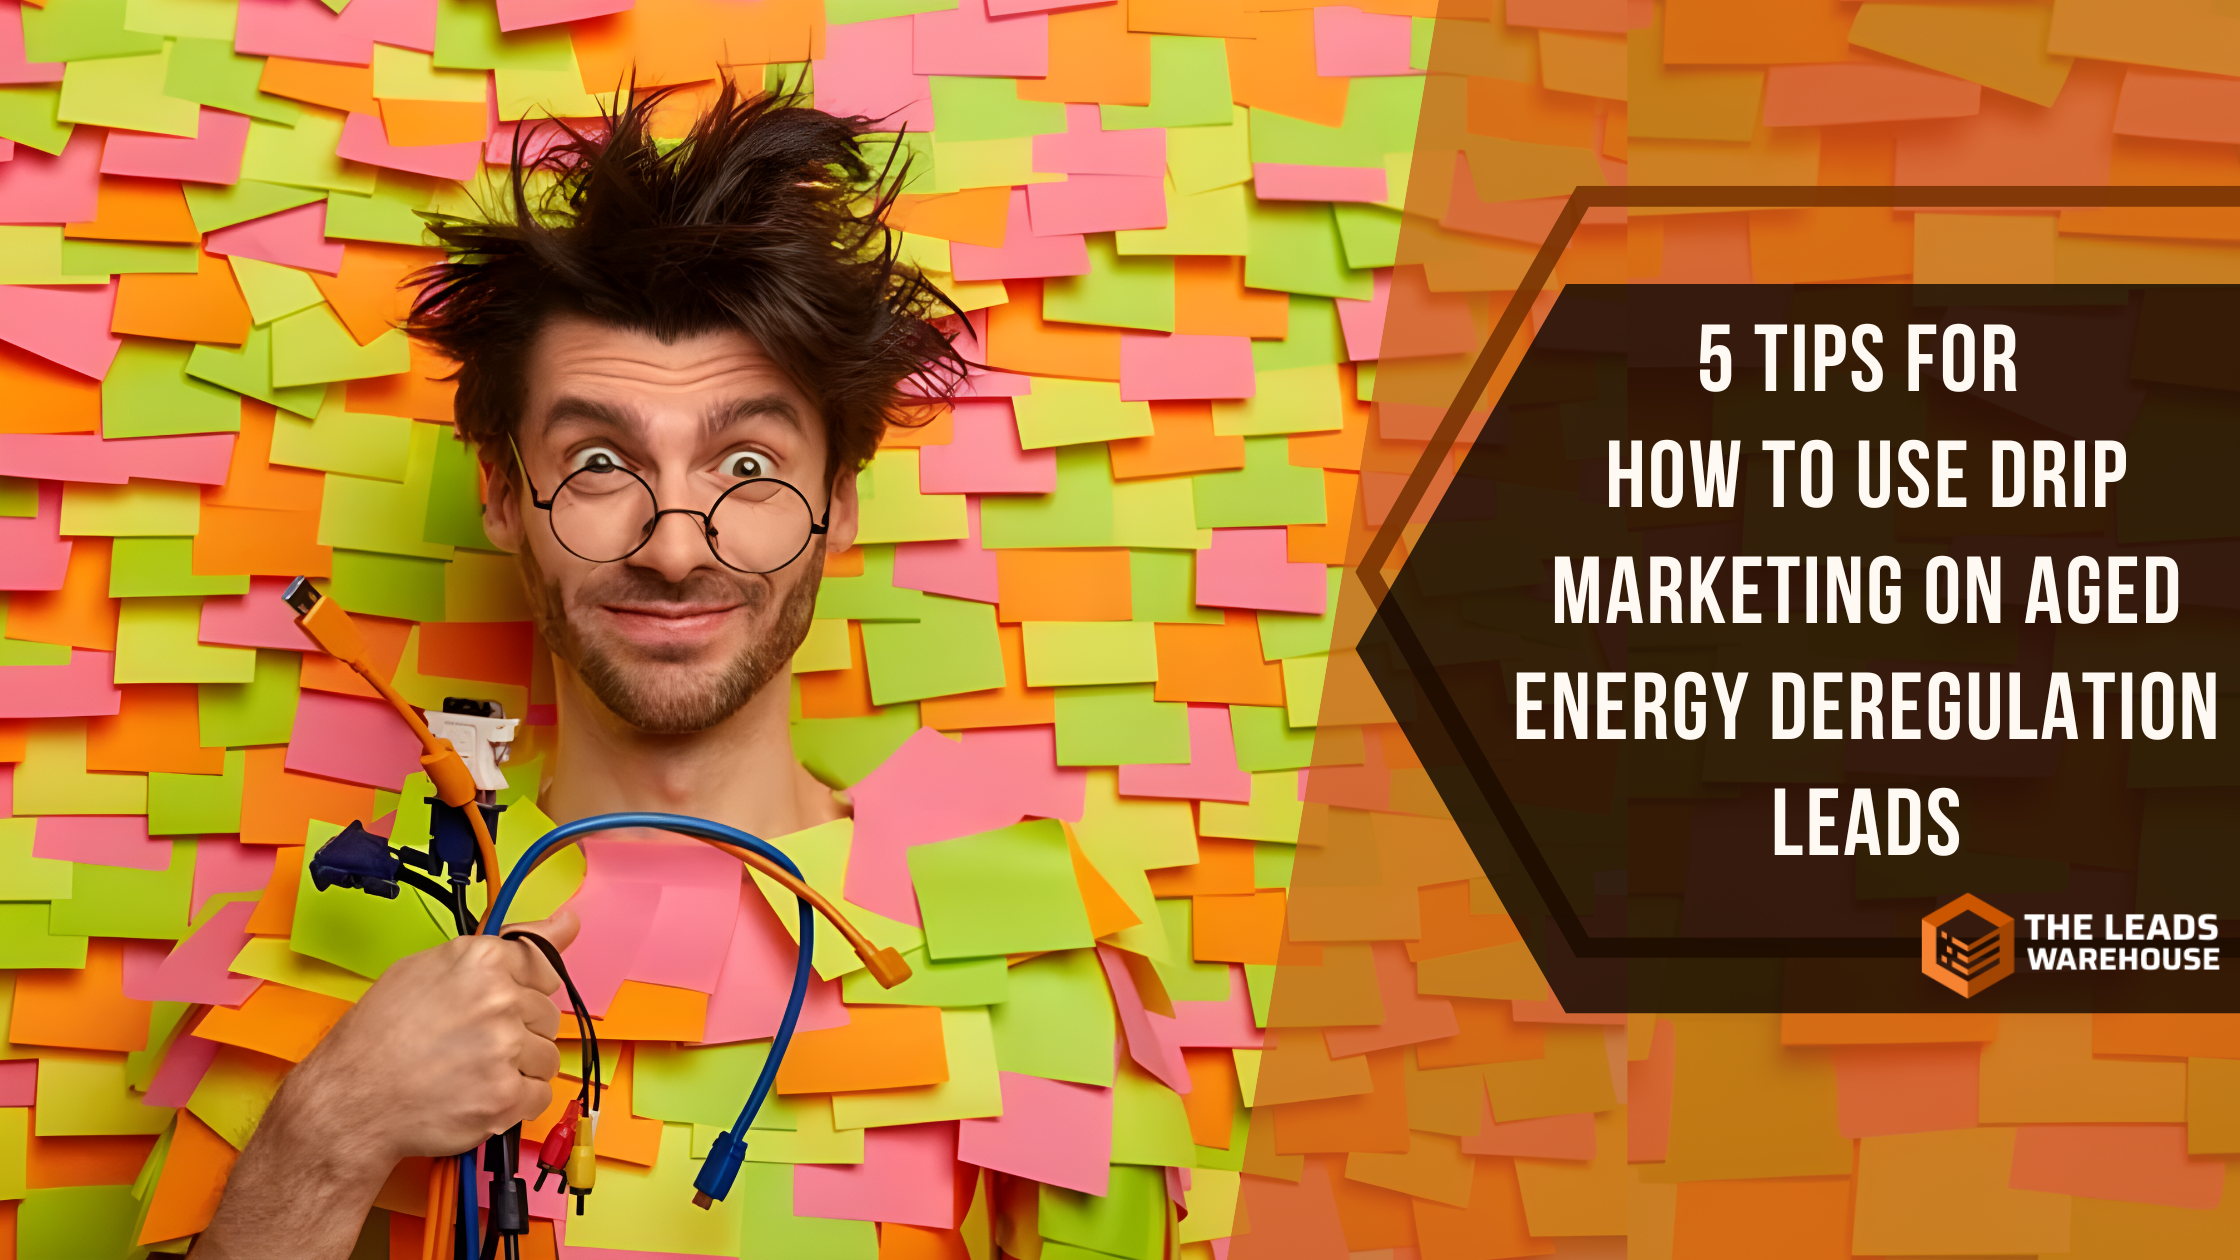 Drip Marketing on Aged Energy Deregulation Leads | 5 Tips